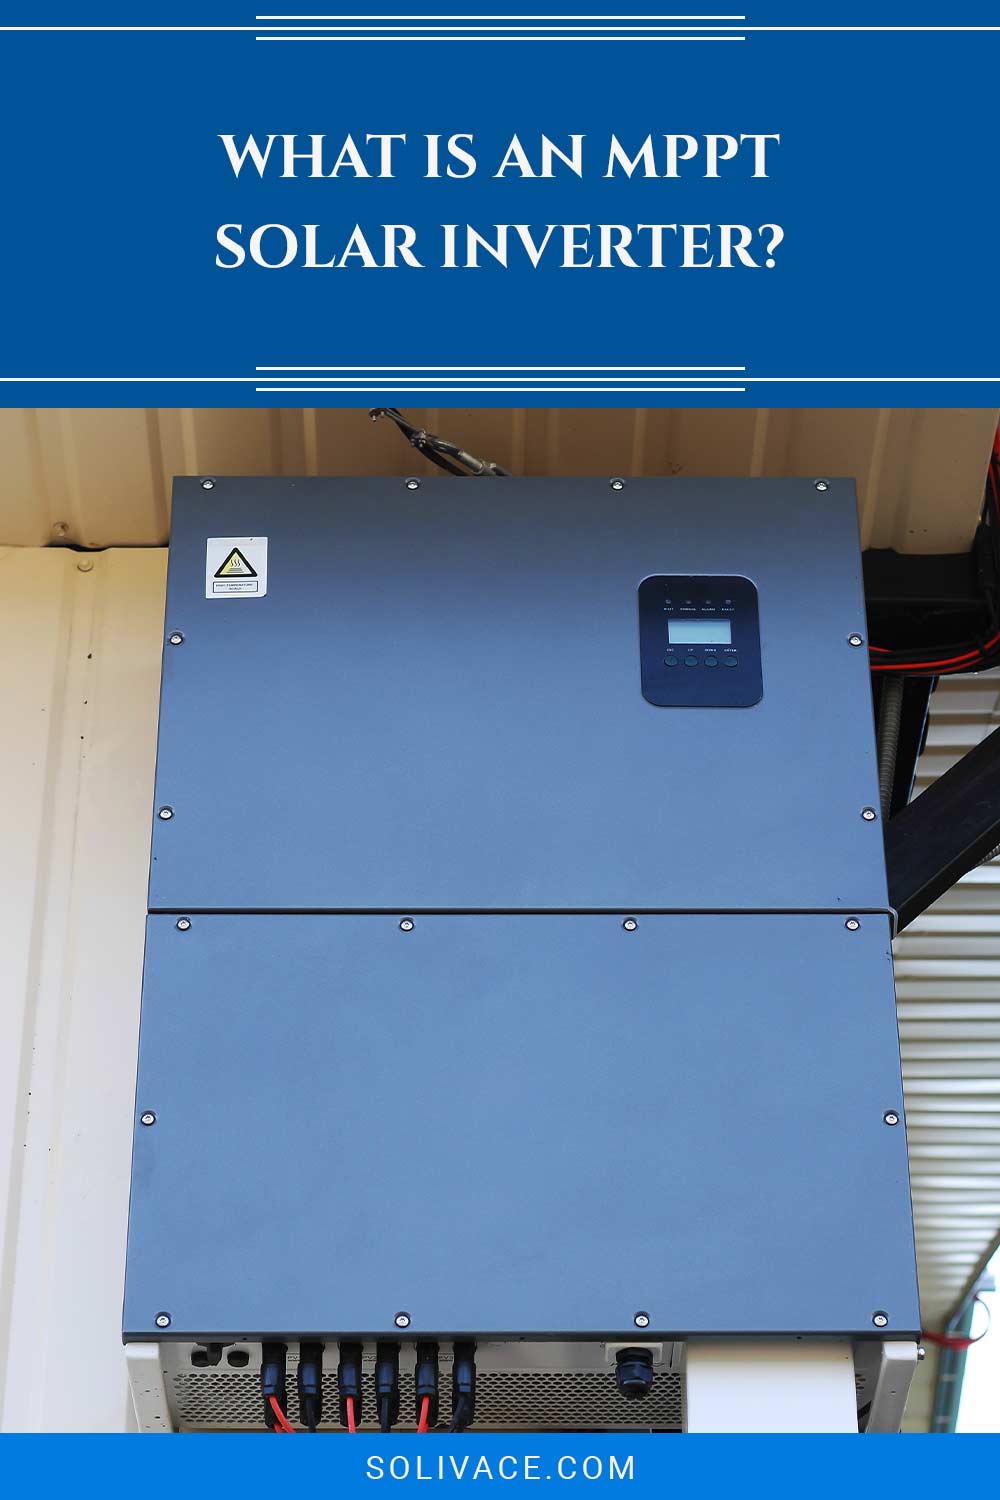 A solar inverter attached to a metal wall - what is MPPT?